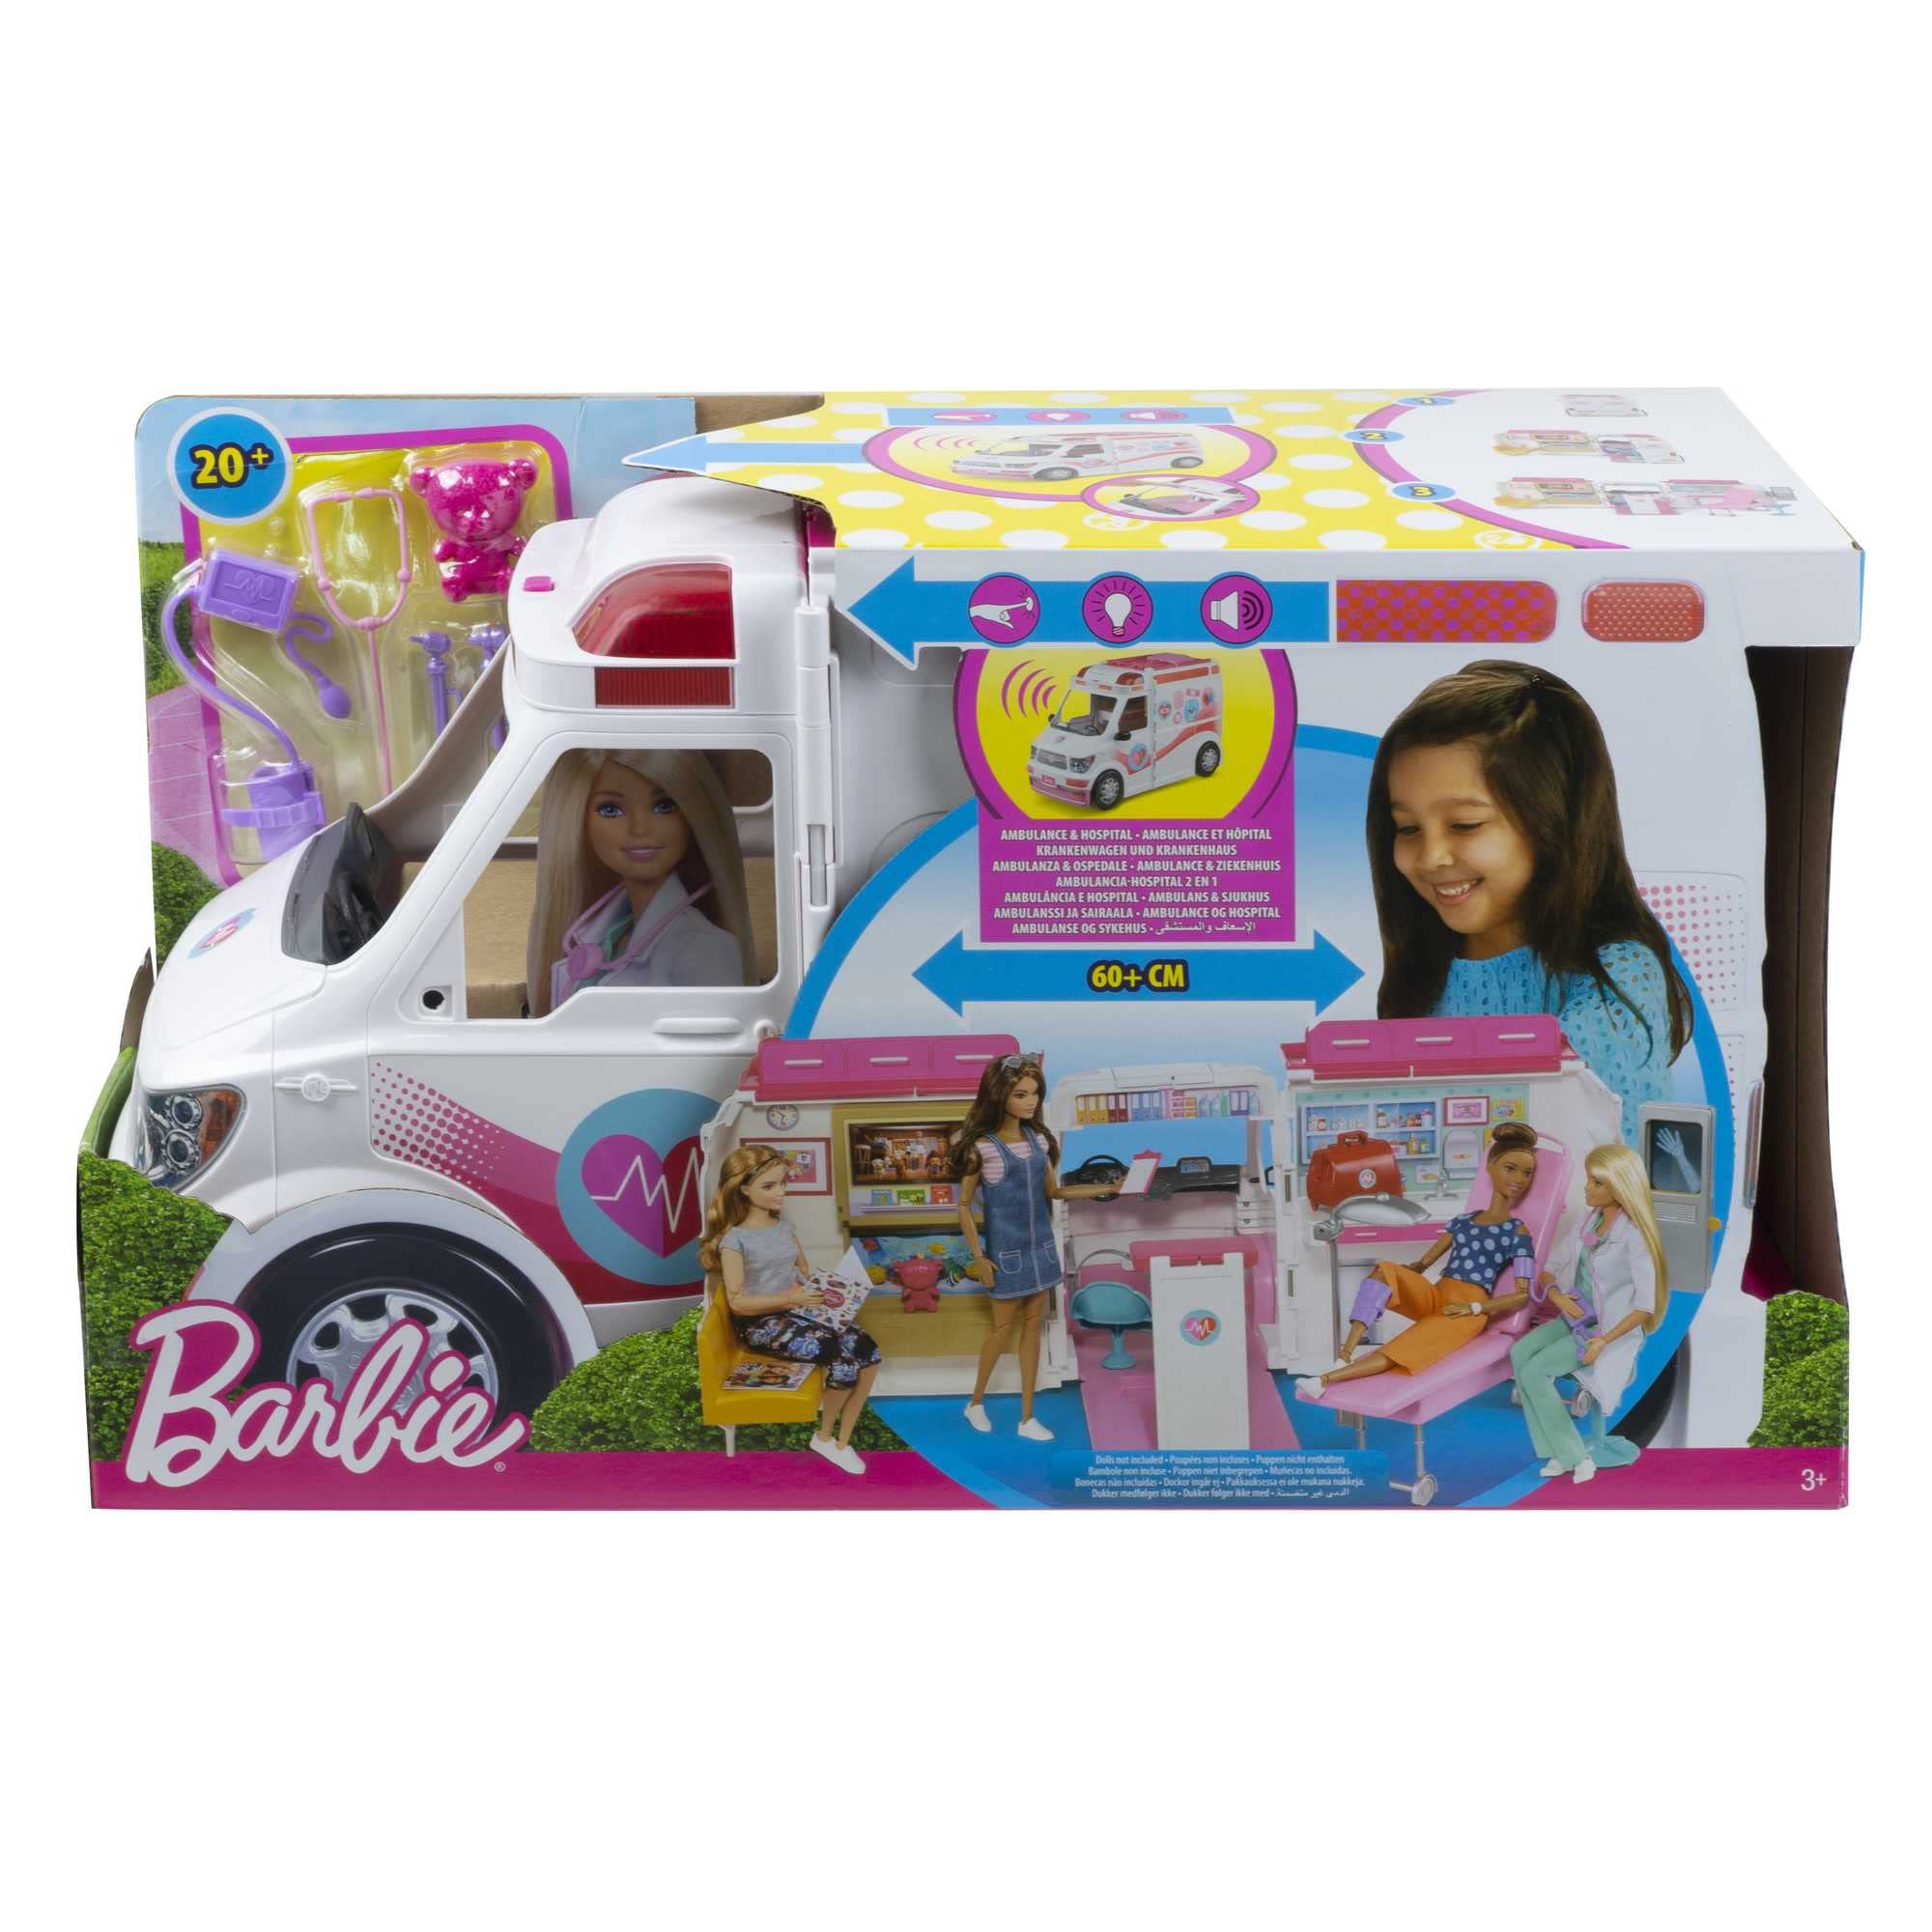 ​​​Barbie Playset with 20+ Accessories, Emergency Vehi​​cle Transforms into 2+ Foot Hospital with Lights and Sounds, Care Clinic​​​​​​​​